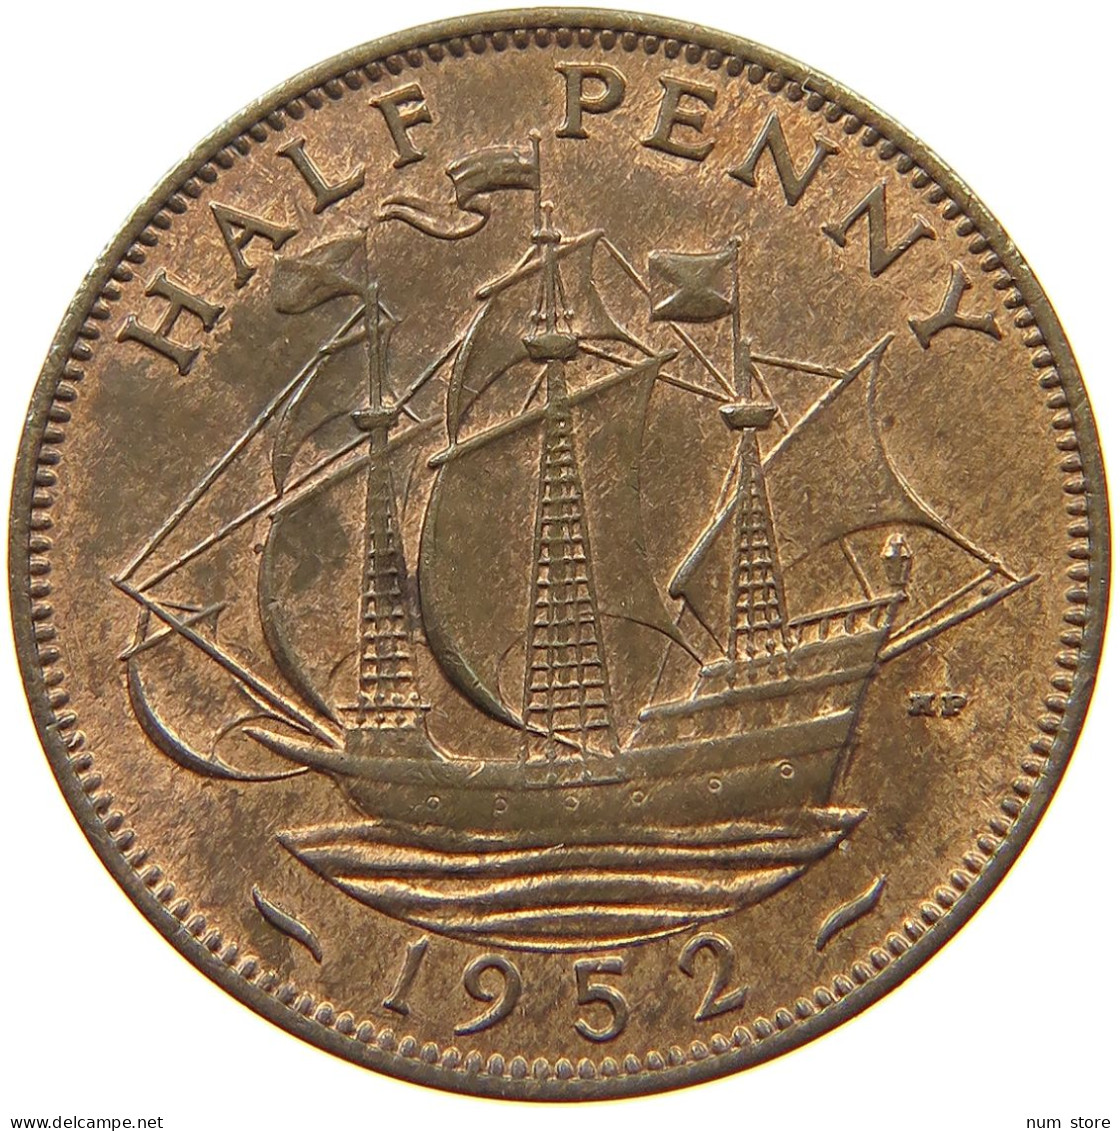 GREAT BRITAIN HALFPENNY 1952 TOP #a011 0355 - C. 1/2 Penny